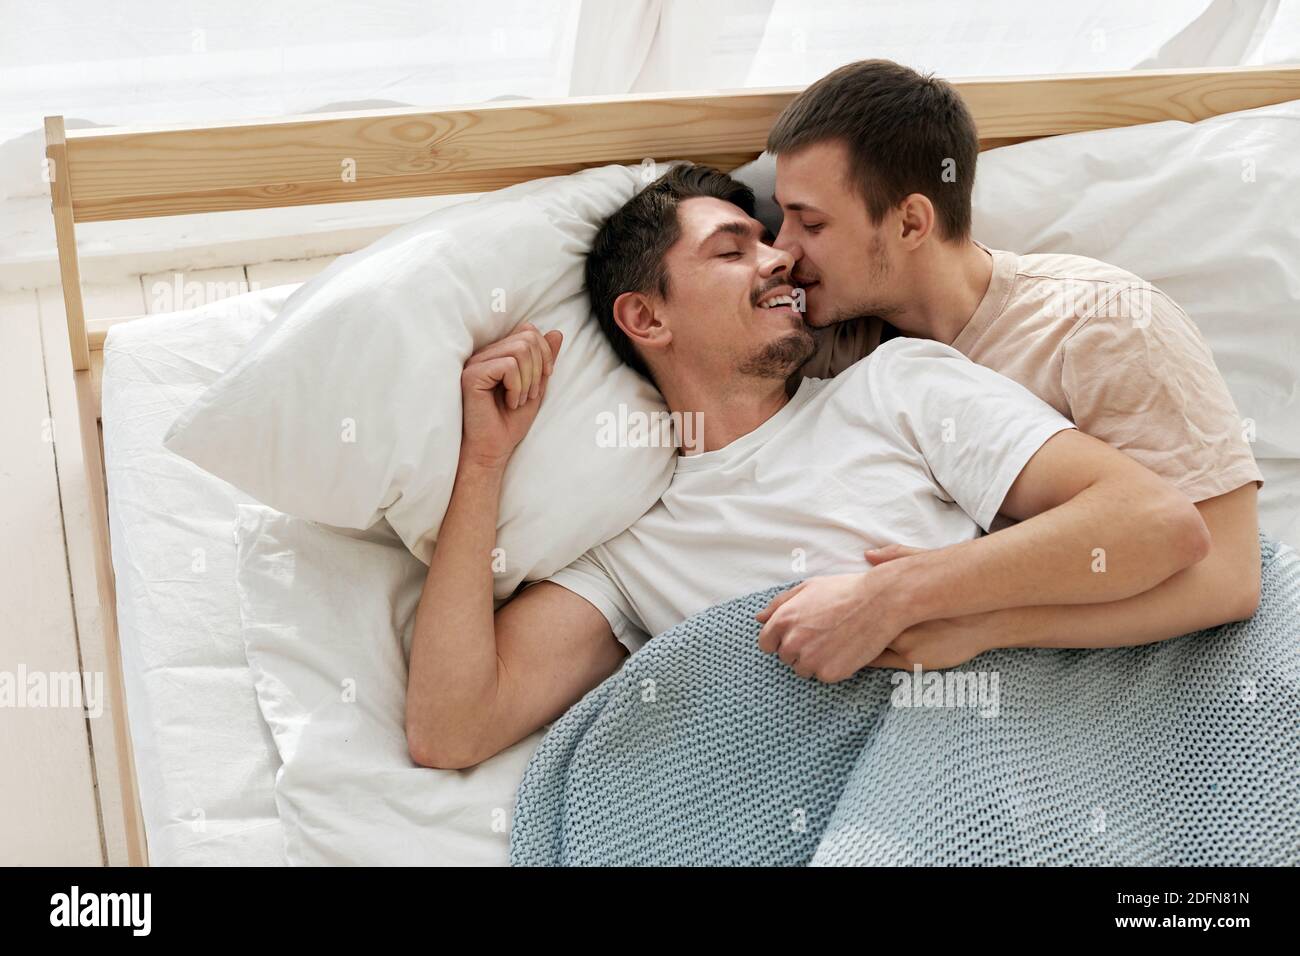 Gay Men Bed High Resolution Stock Photography and Images - Alamy